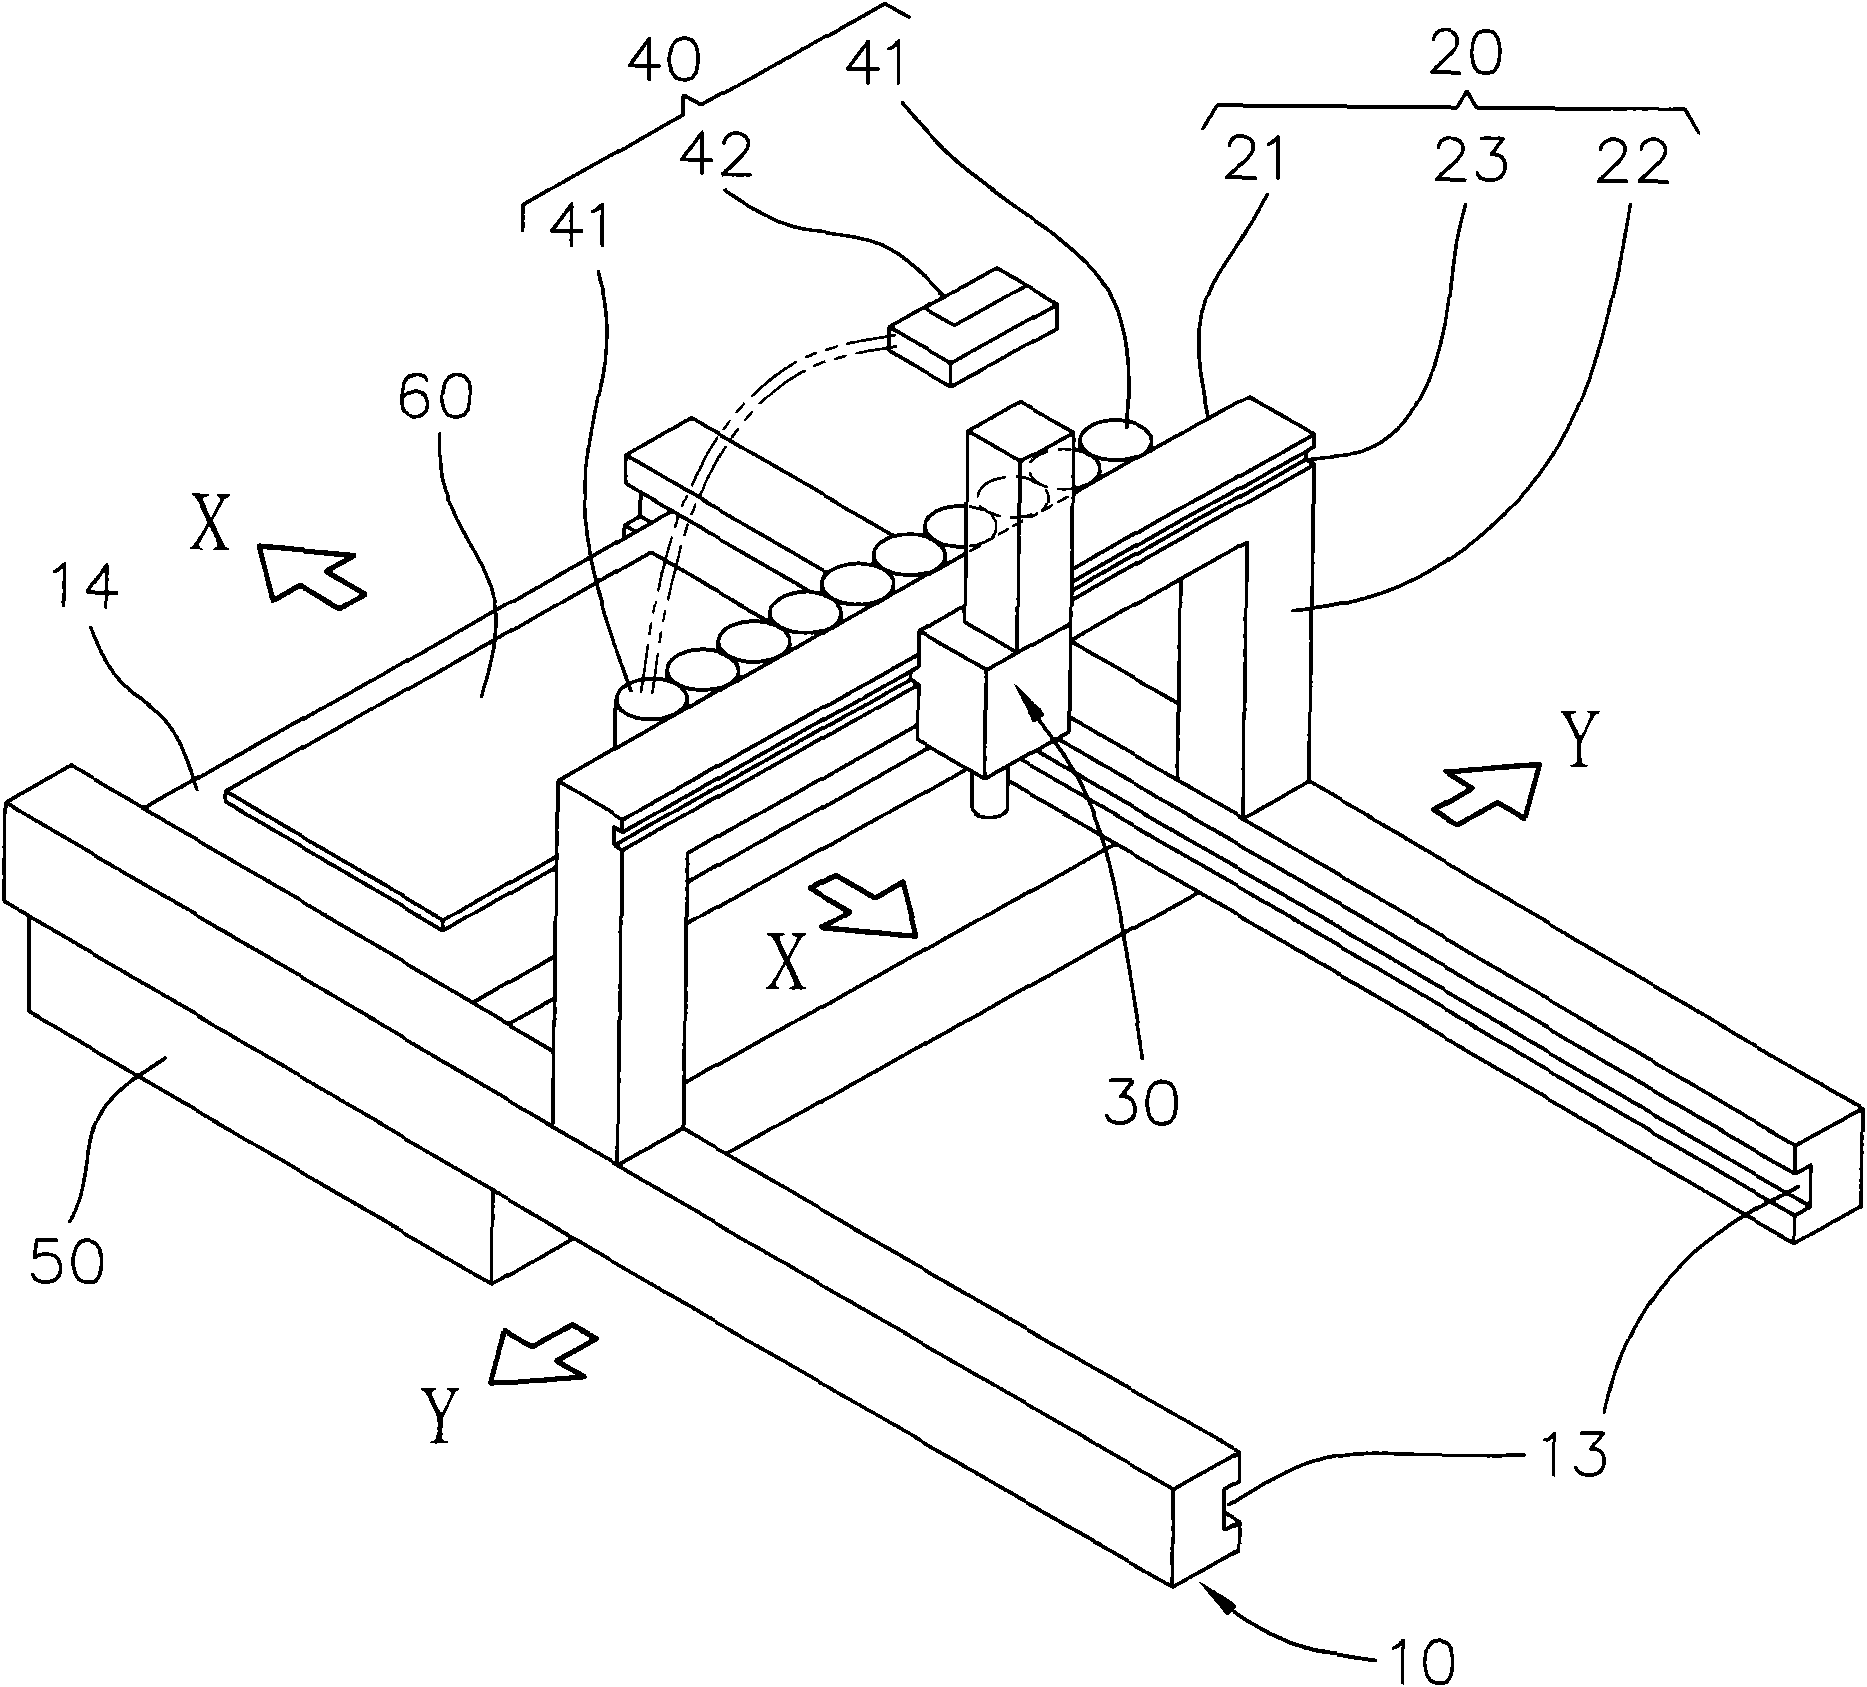 Laser repair device with automatic detection function